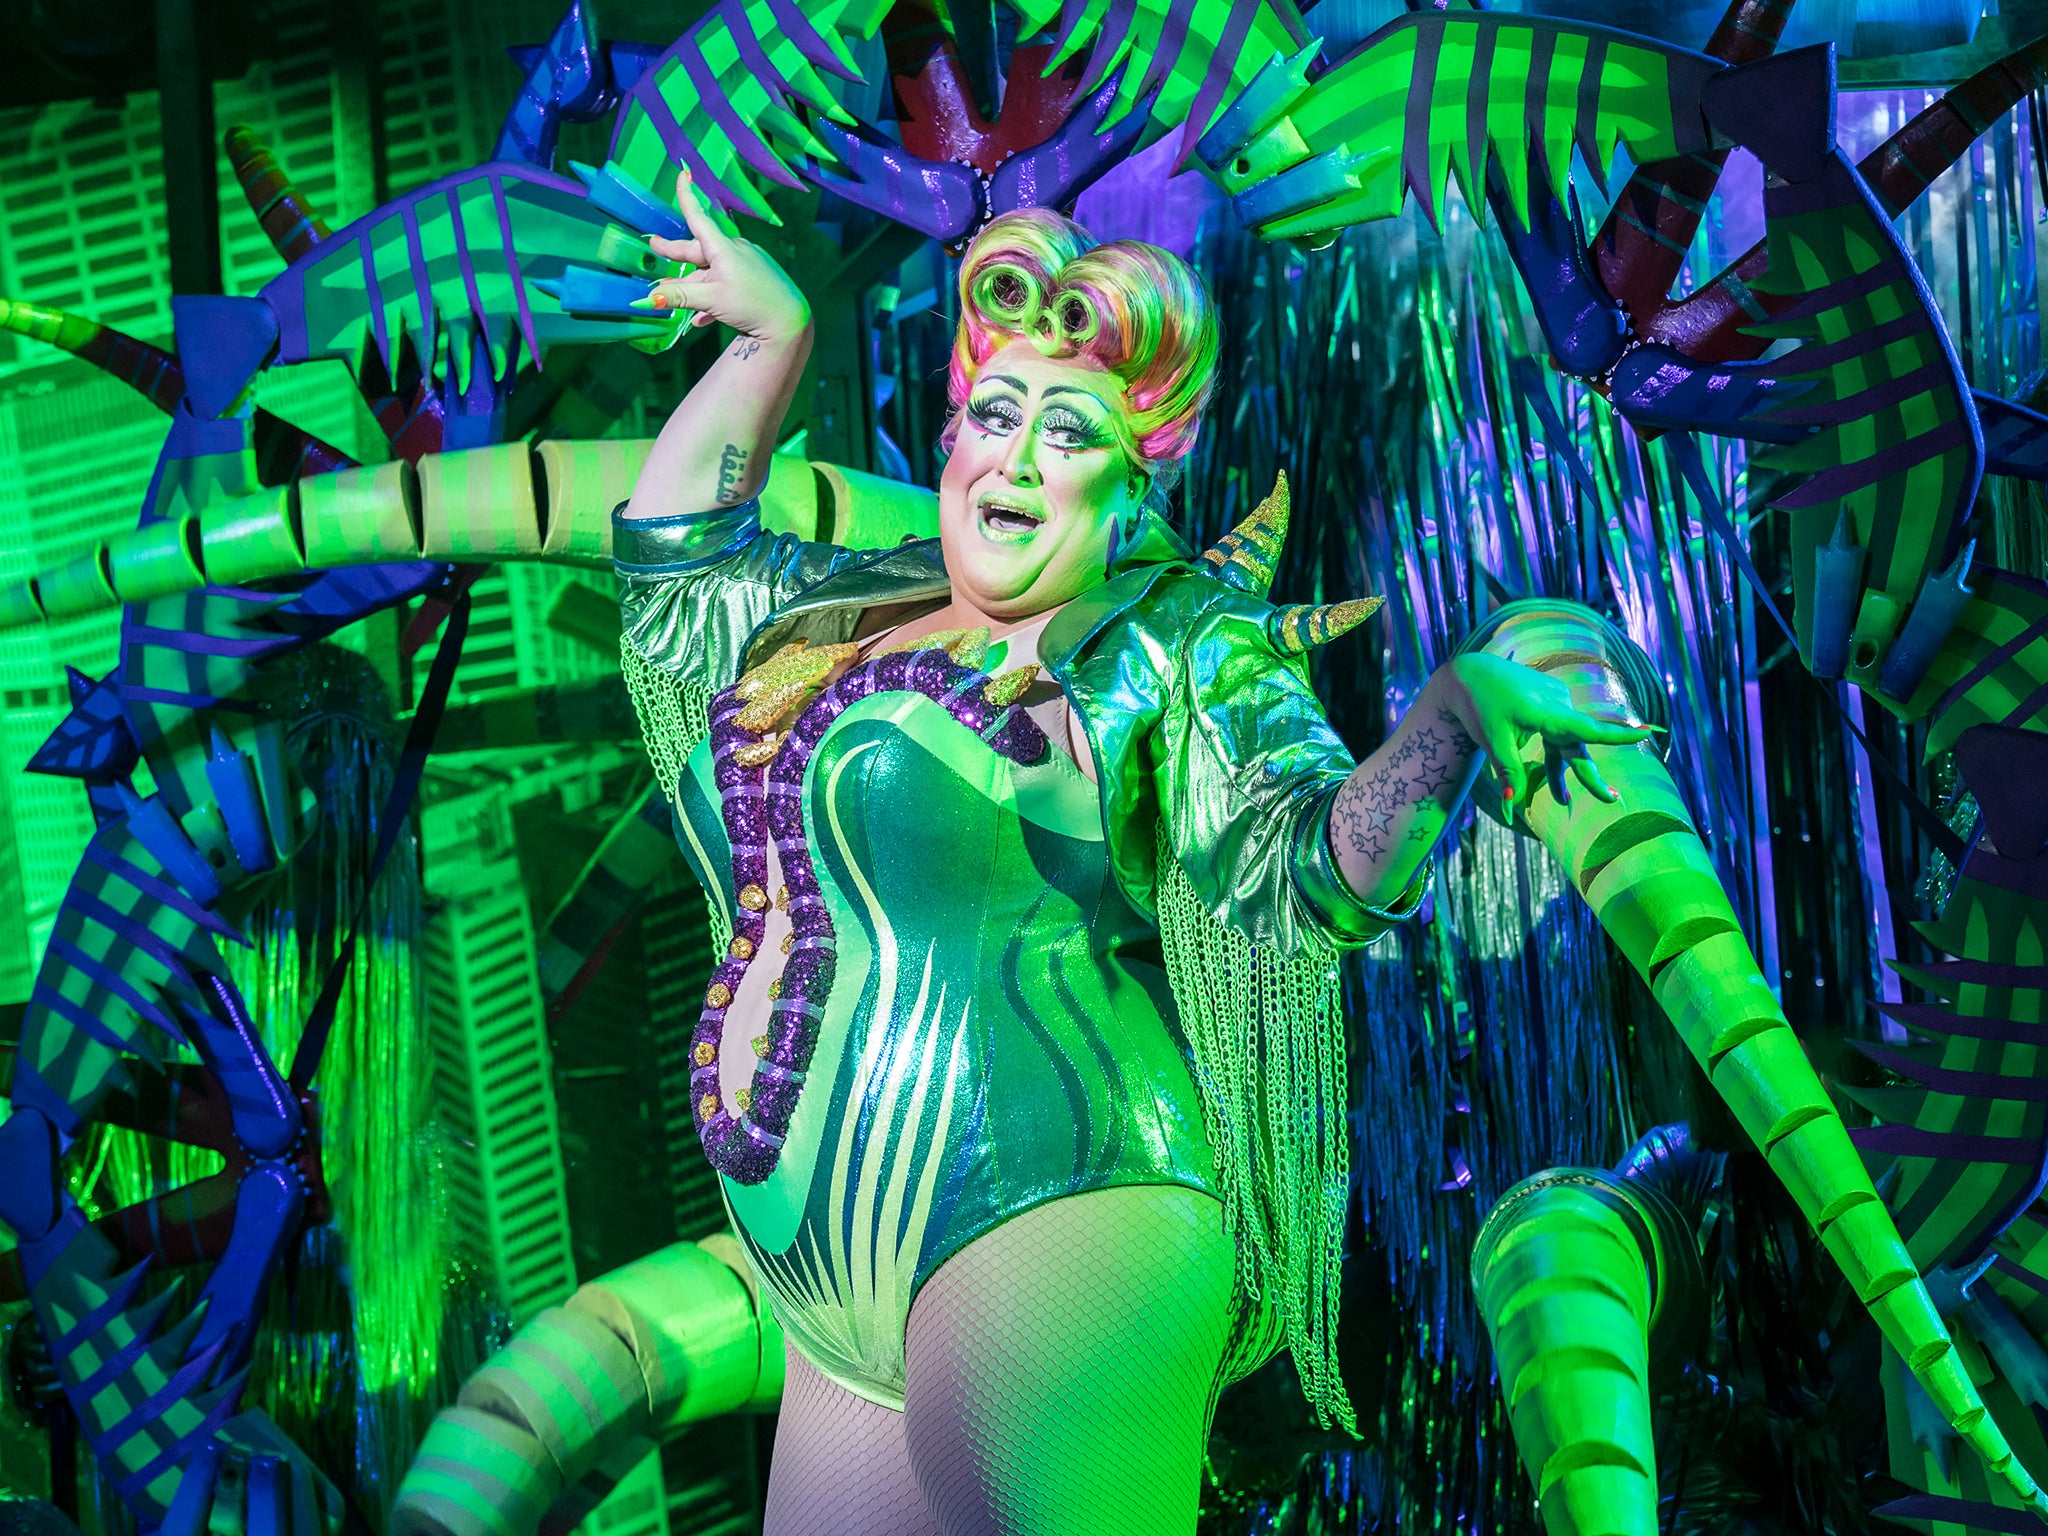 Vicky Vox as Audrey II in Little Shop of Horrors at the Regents Park Open Air Theatre